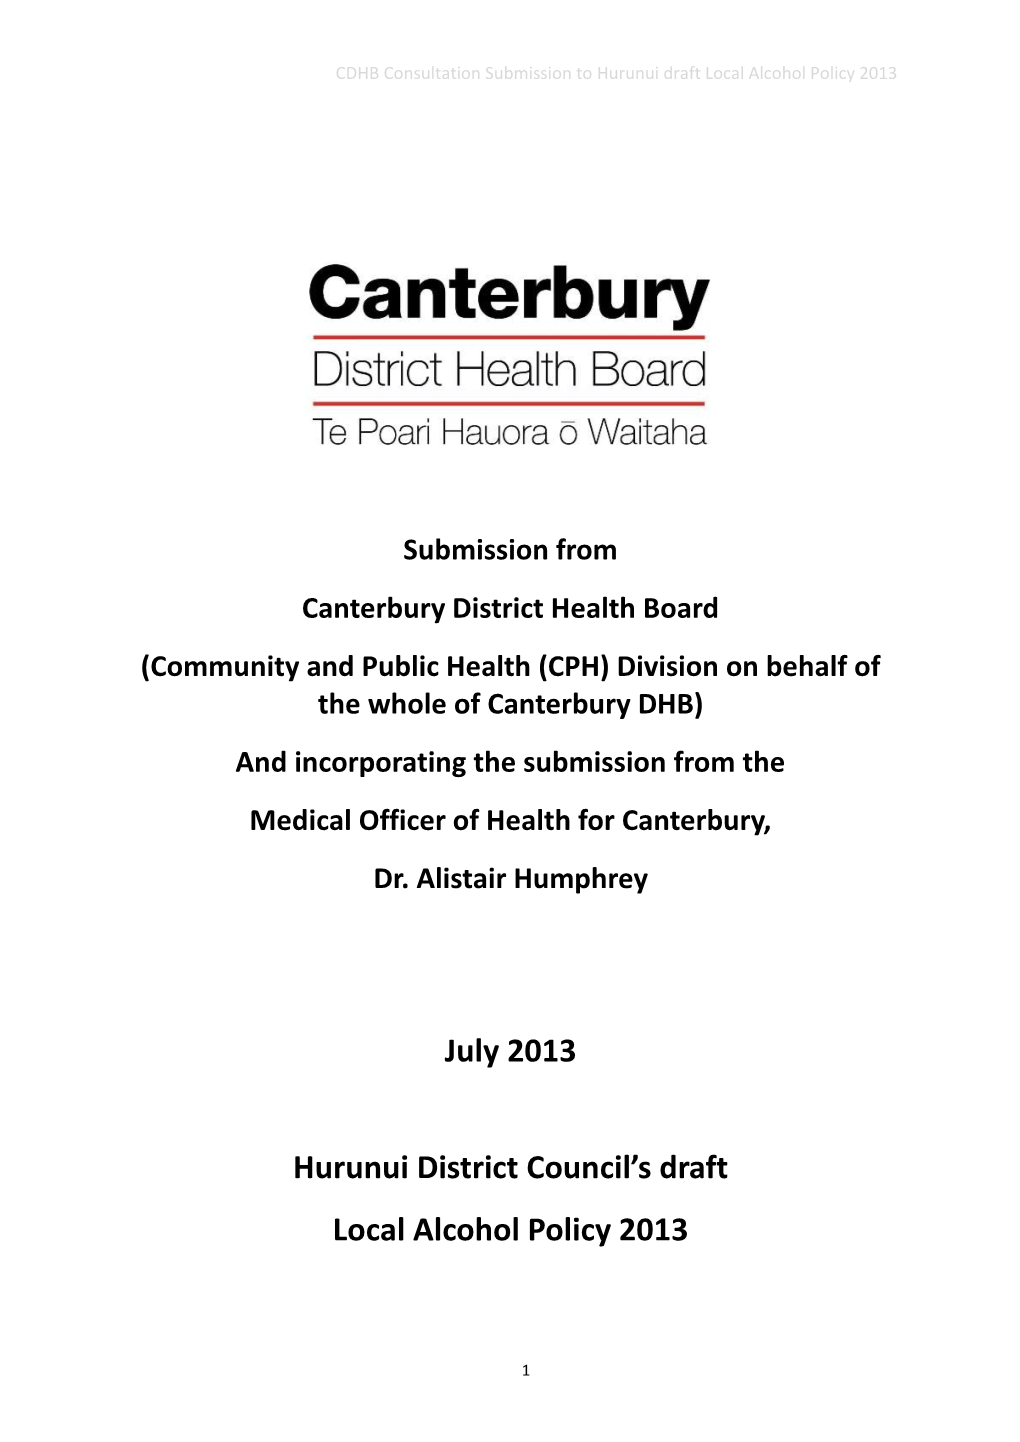 Submission from the Canterbury District Health Board on The